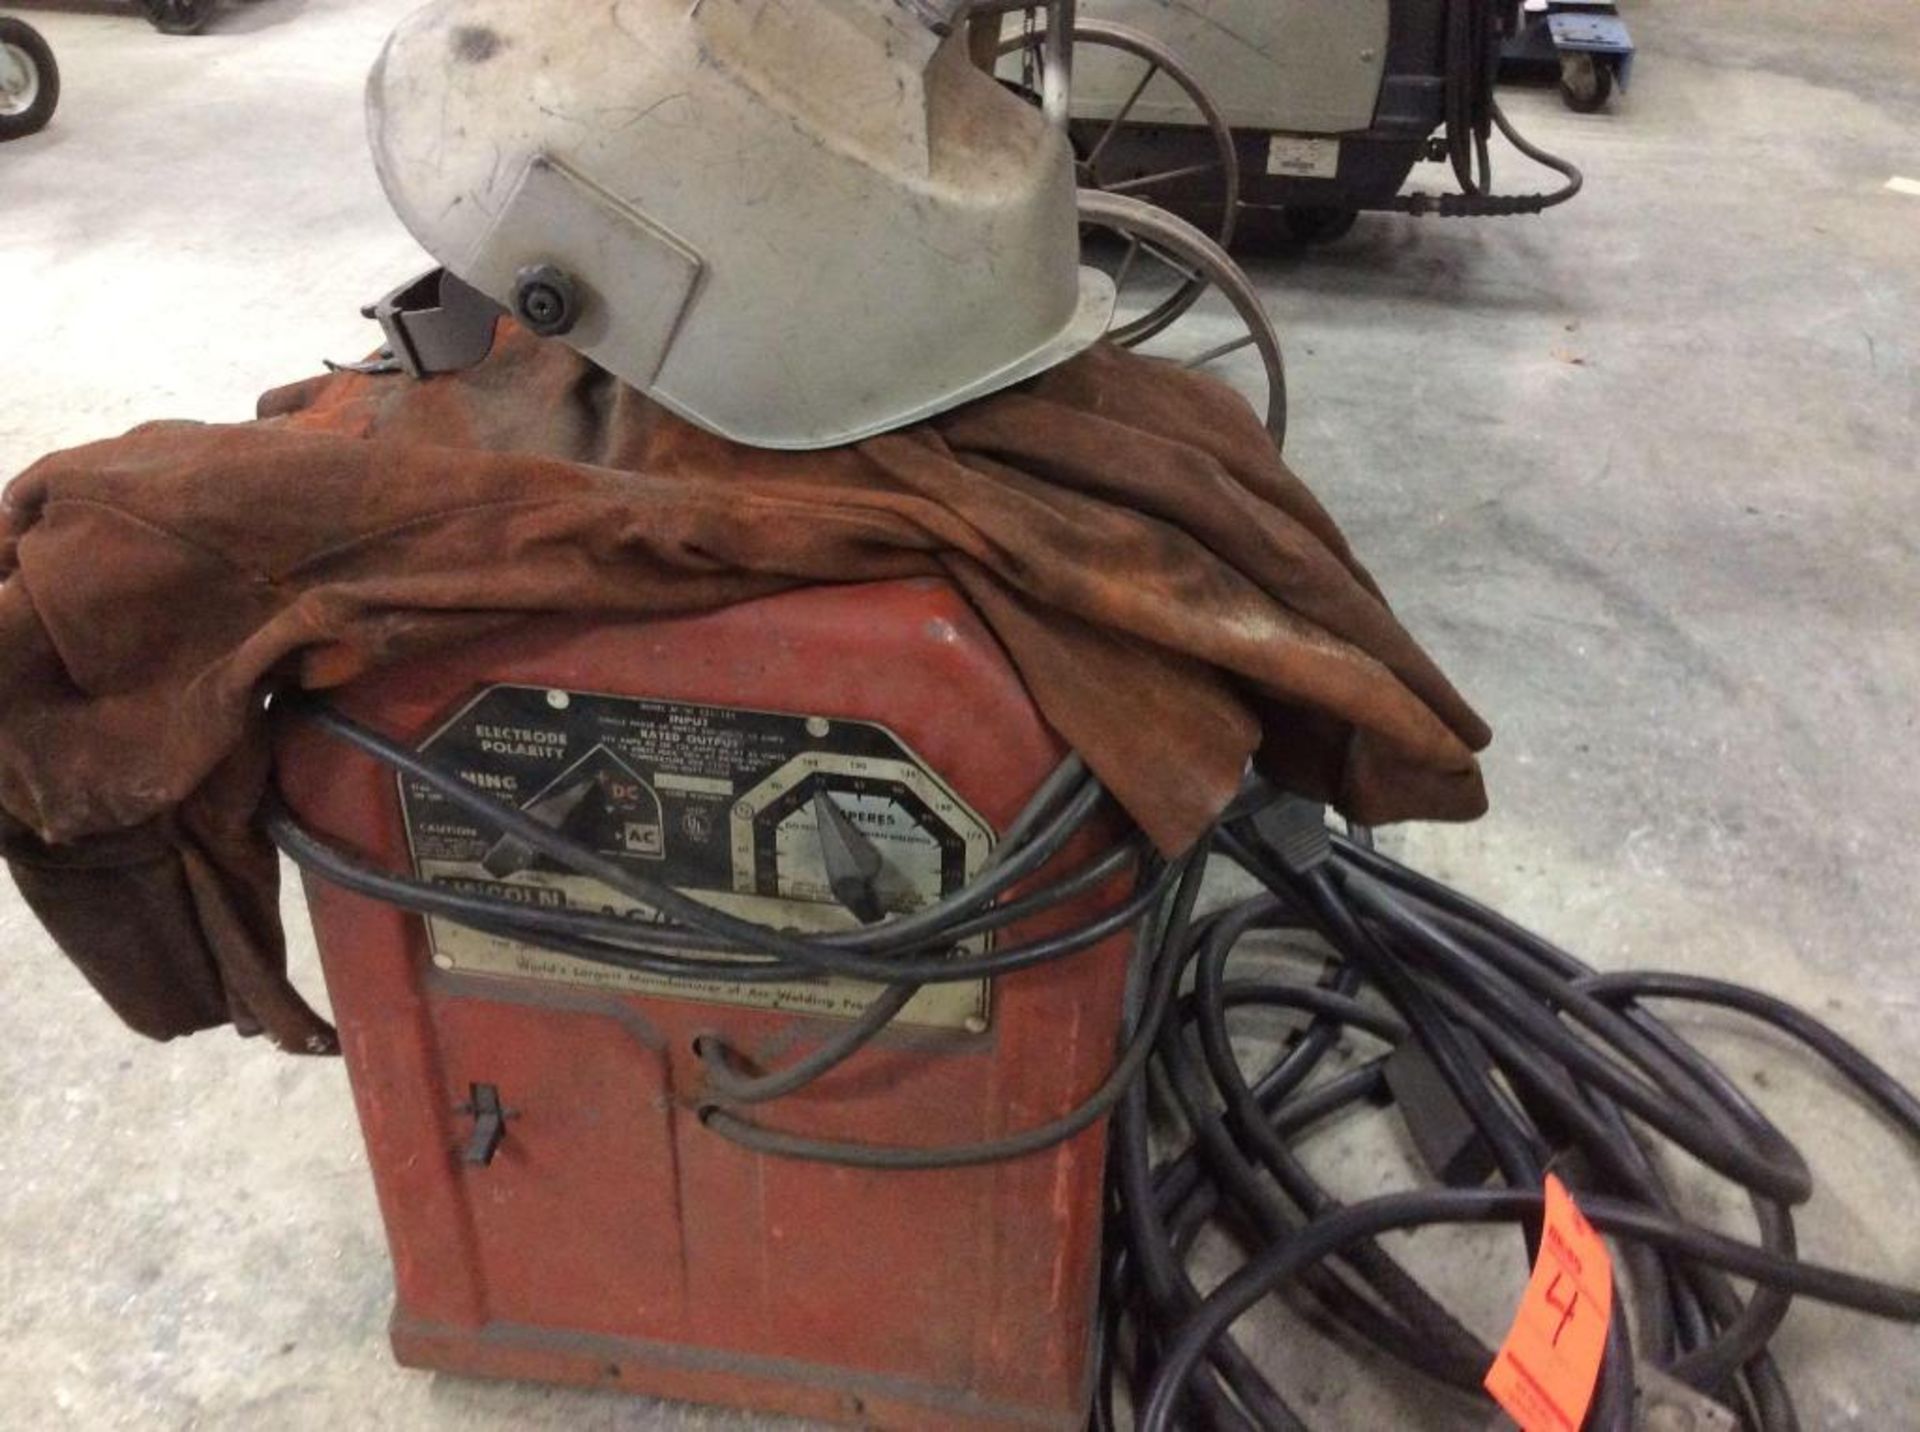 Lot contains (1) Lincoln AC/DC 225/125 electric arc welder with leathers, and (1) Sears, m/n 397.196 - Image 2 of 5